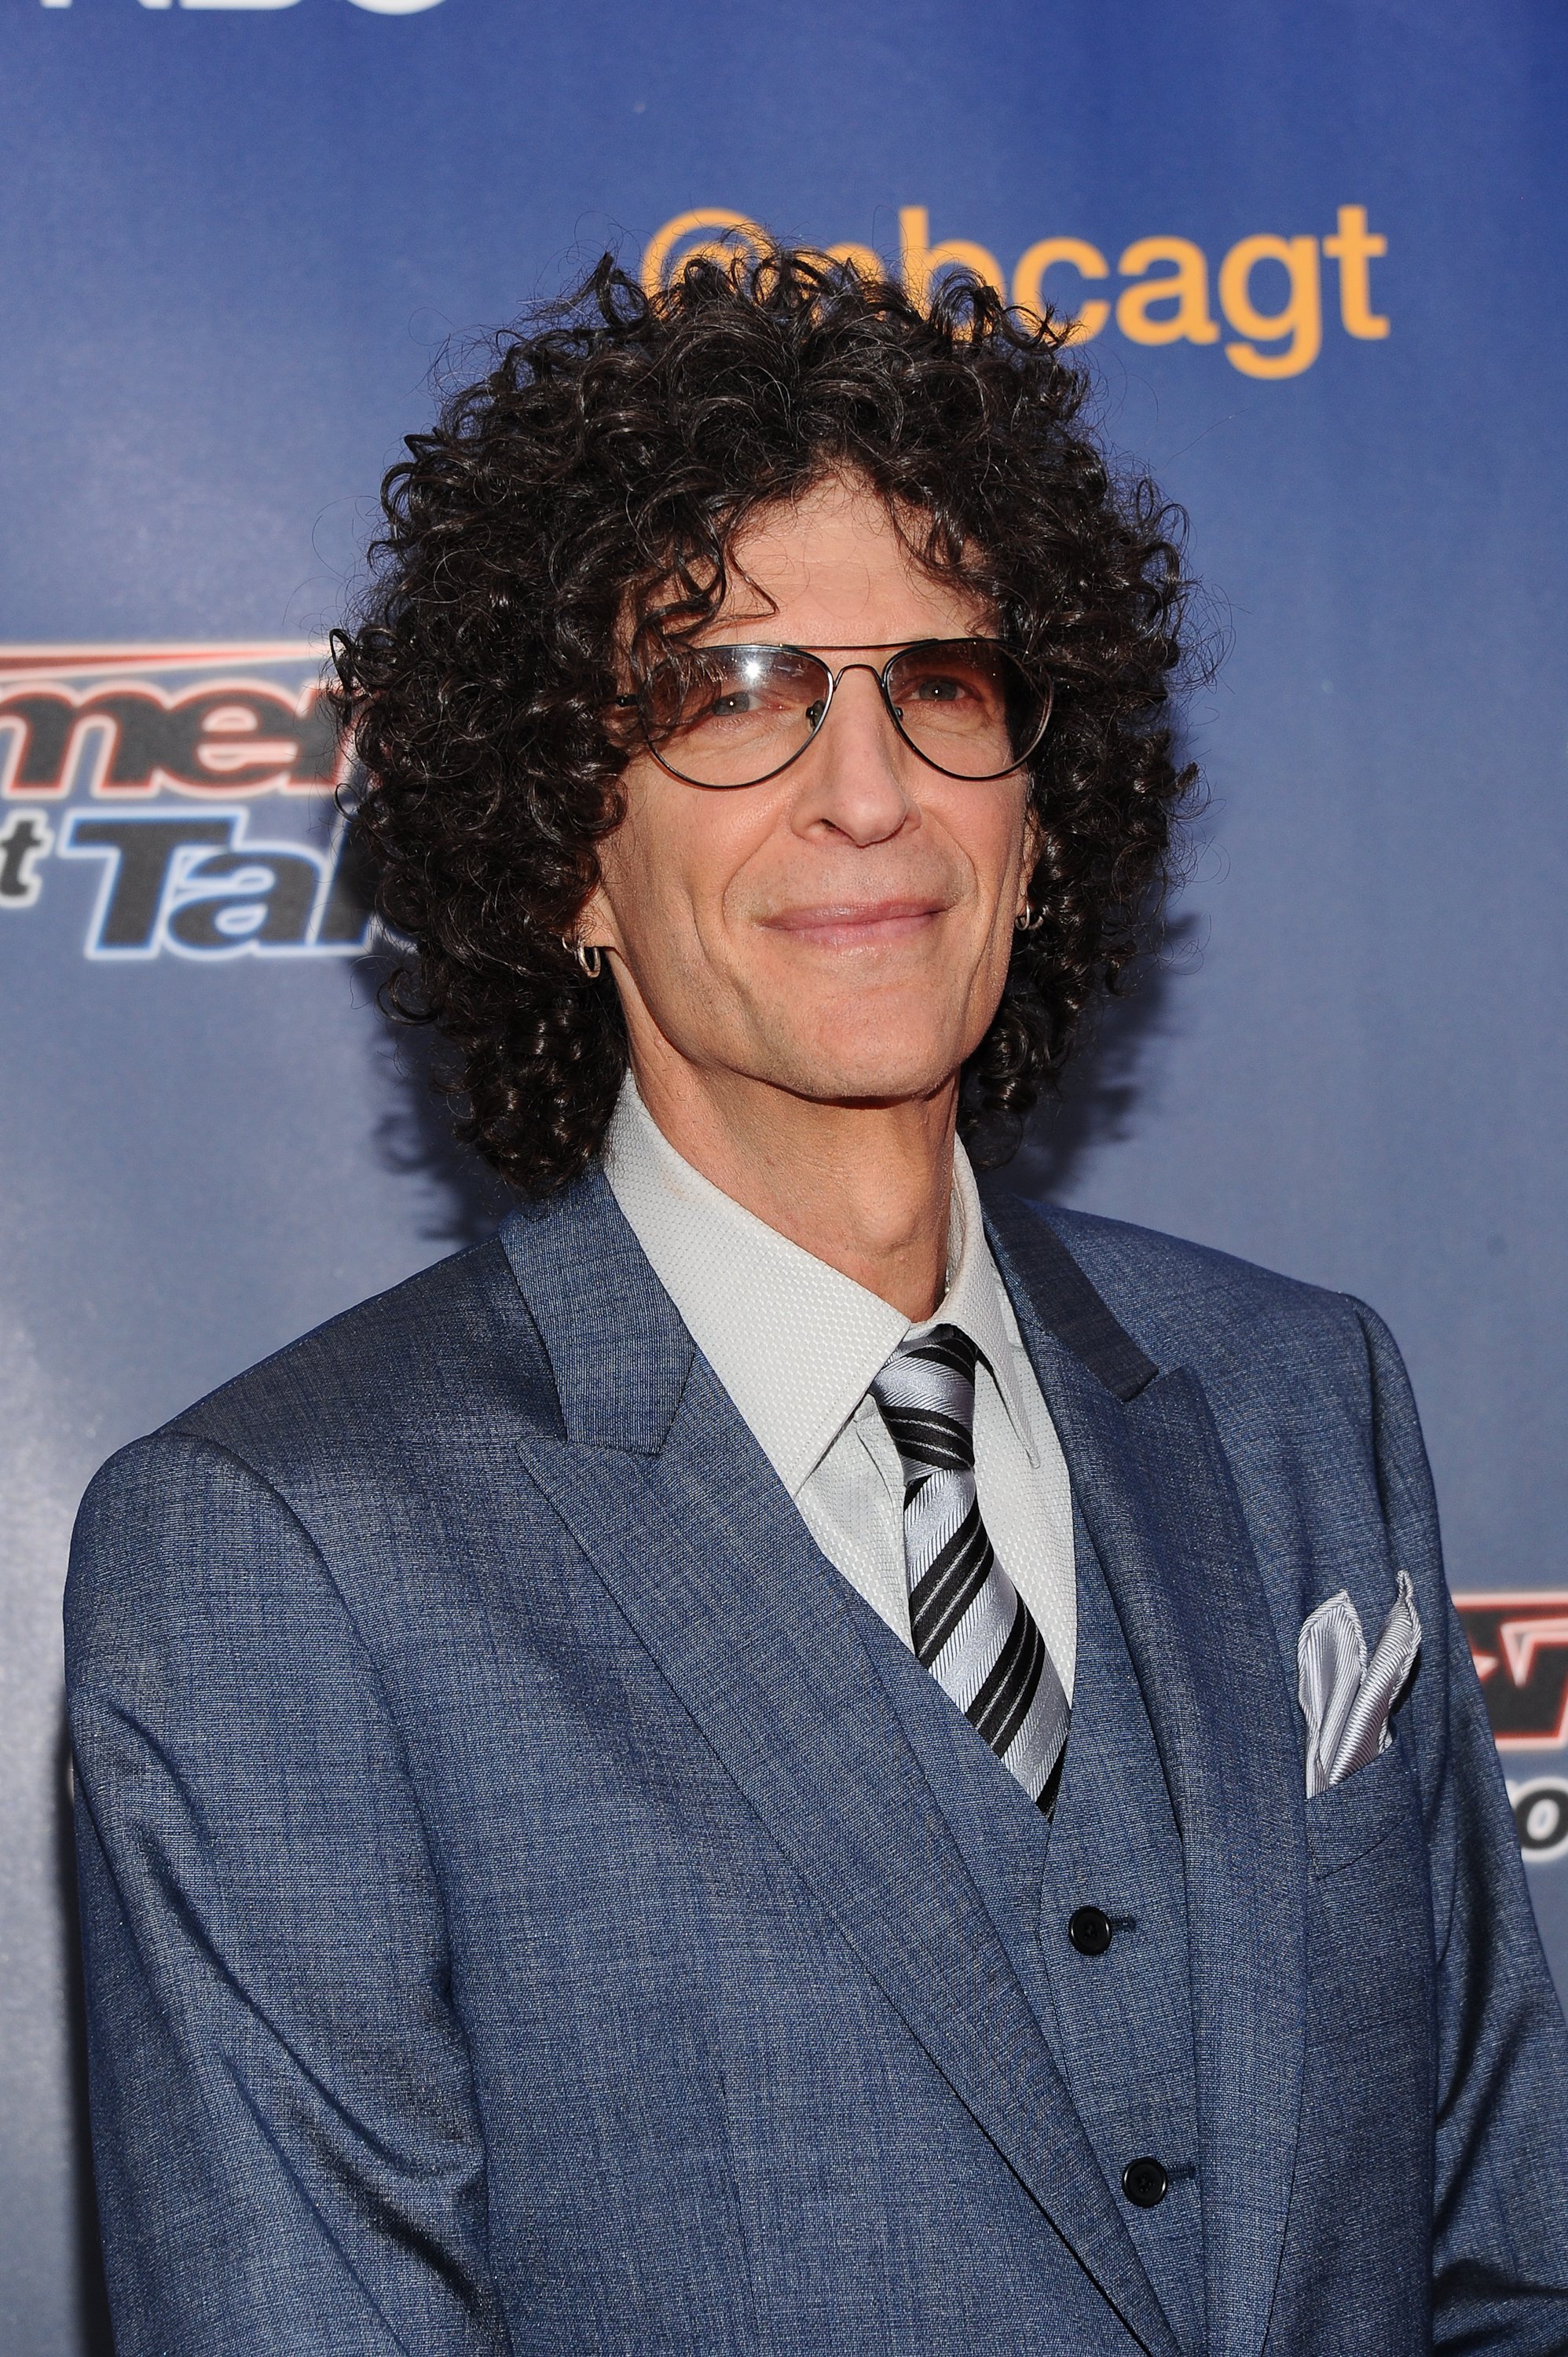 Howard Stern attends the Season Nine Red Carpet Event of "America's Got Talent in New York City on July 29, 2014 | Photo: Getty Images